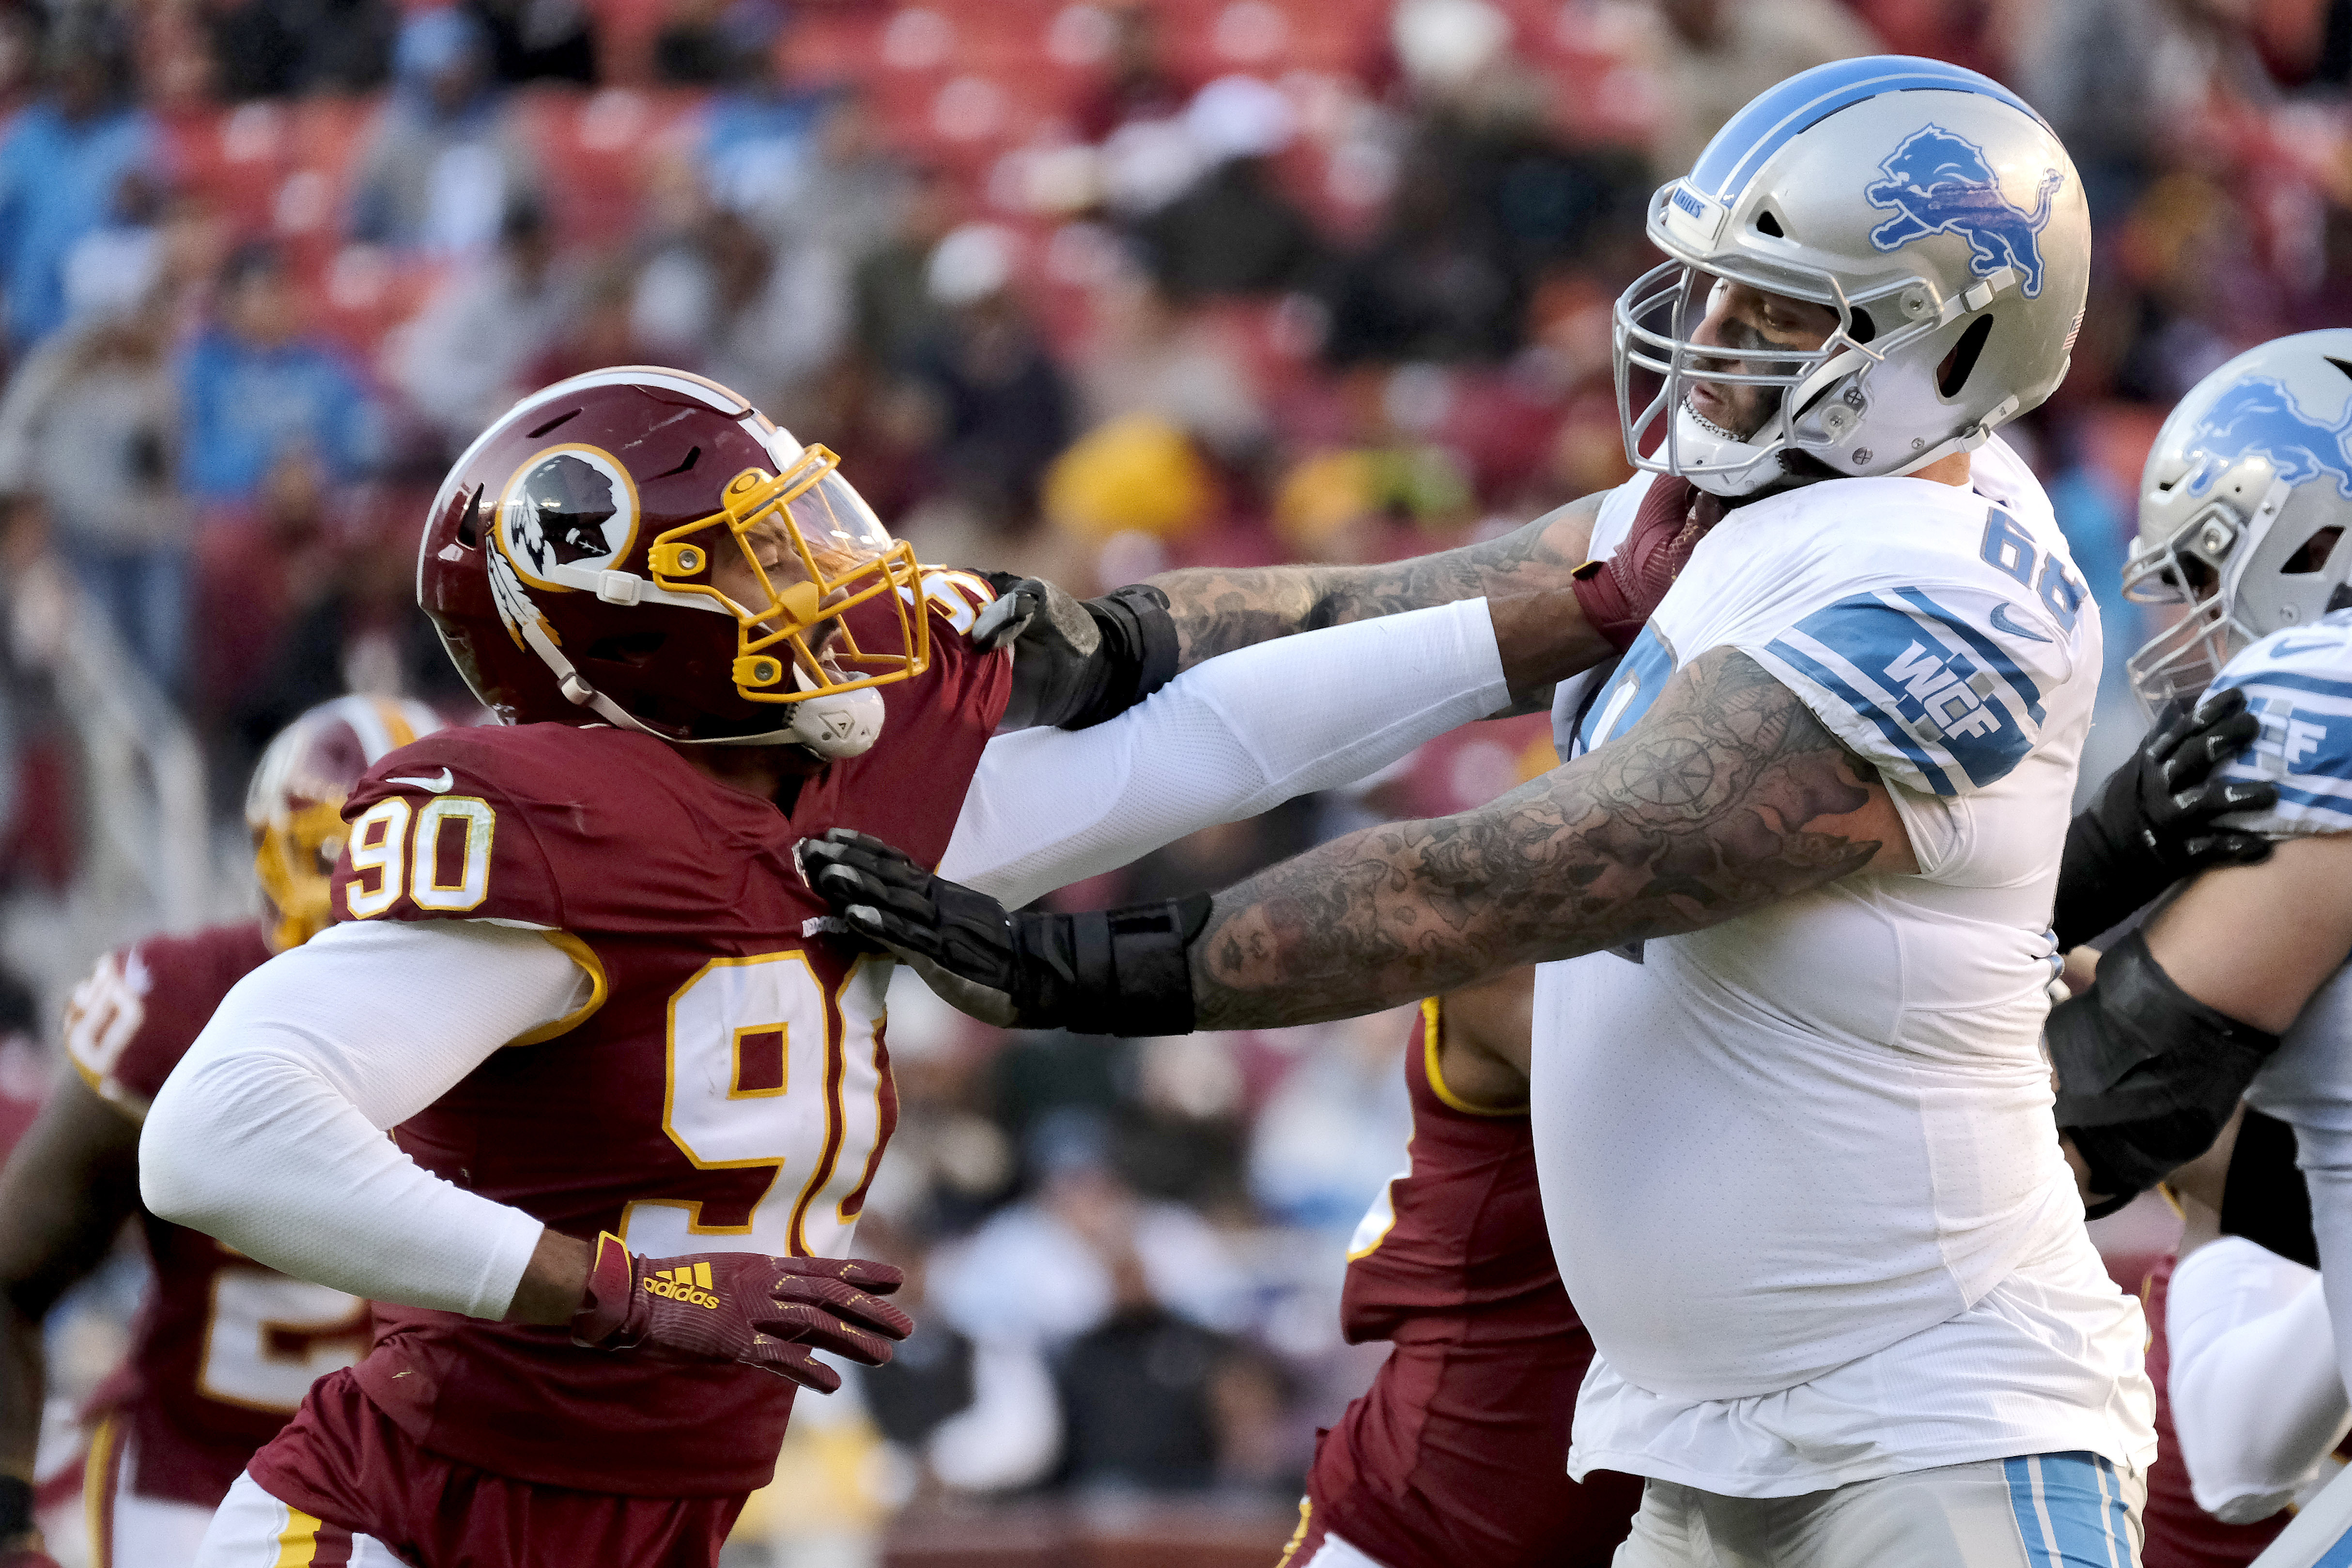 Redskins come back to beat Lions; Haskins misses final snap